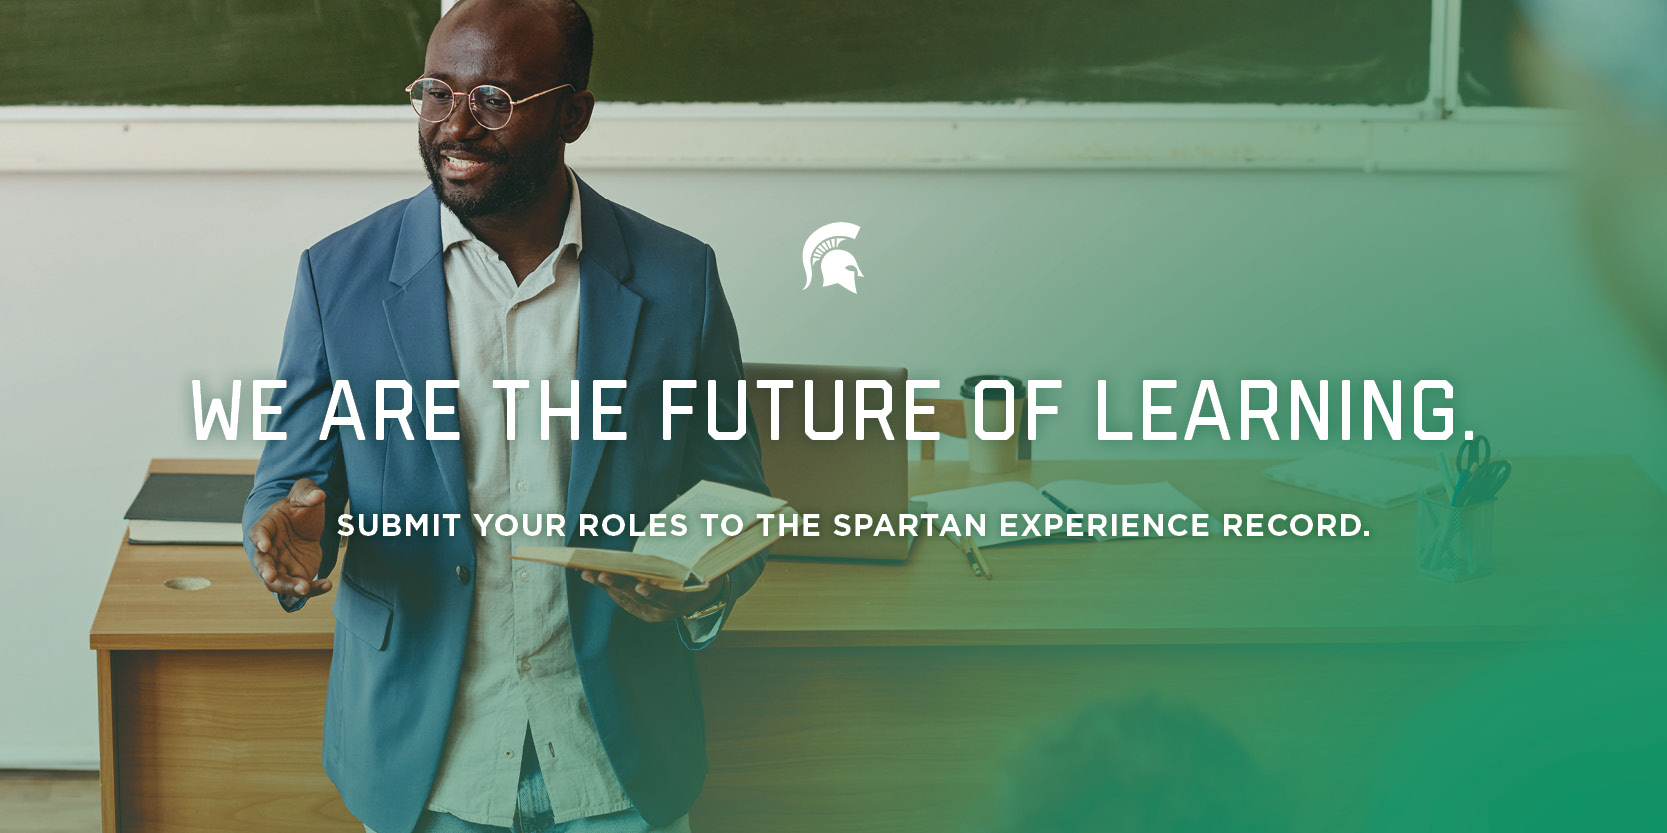 An MSU graphic showing an instructor holding a book, with text saying "We are the future of learning," and "Submit your roles to the Spartan Experience Record."